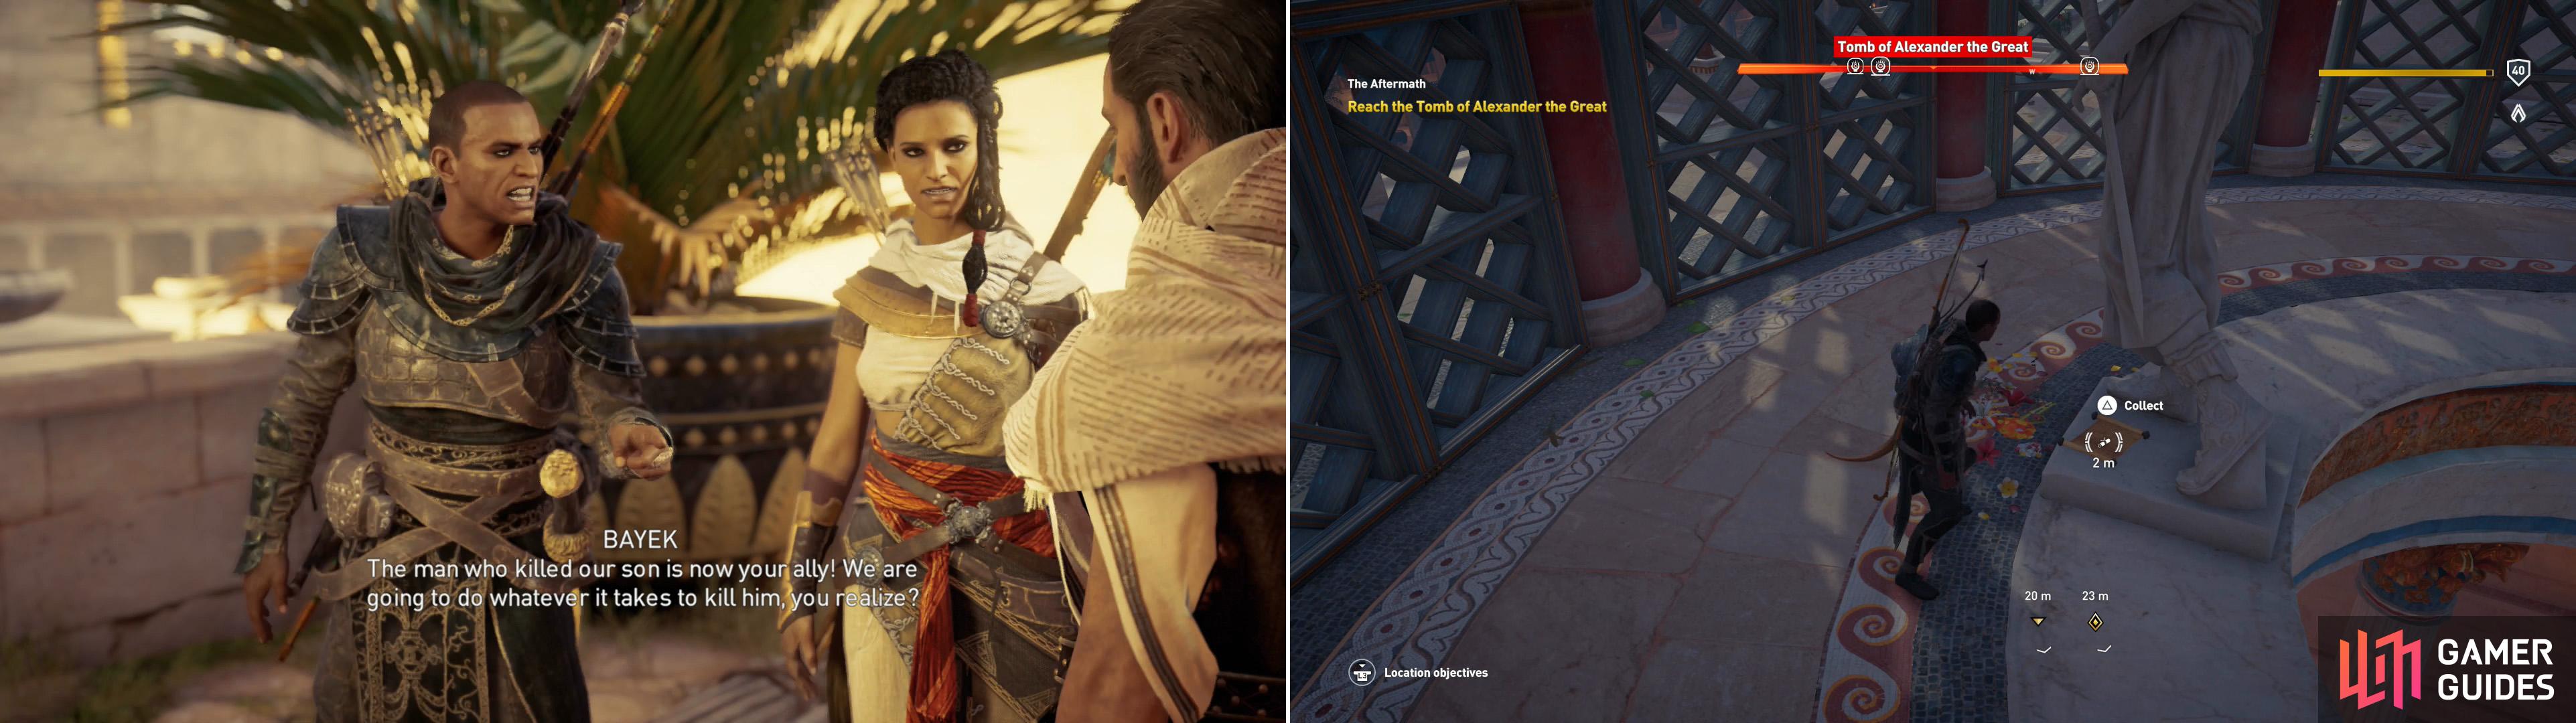 After being snubbed by Cleopatra, Aya and Bayek will vent their frustration on Apollodorus (left). Grab the “Ray of Hope” Papyrus Puzzle scroll from the Tomb of Alexander (right).